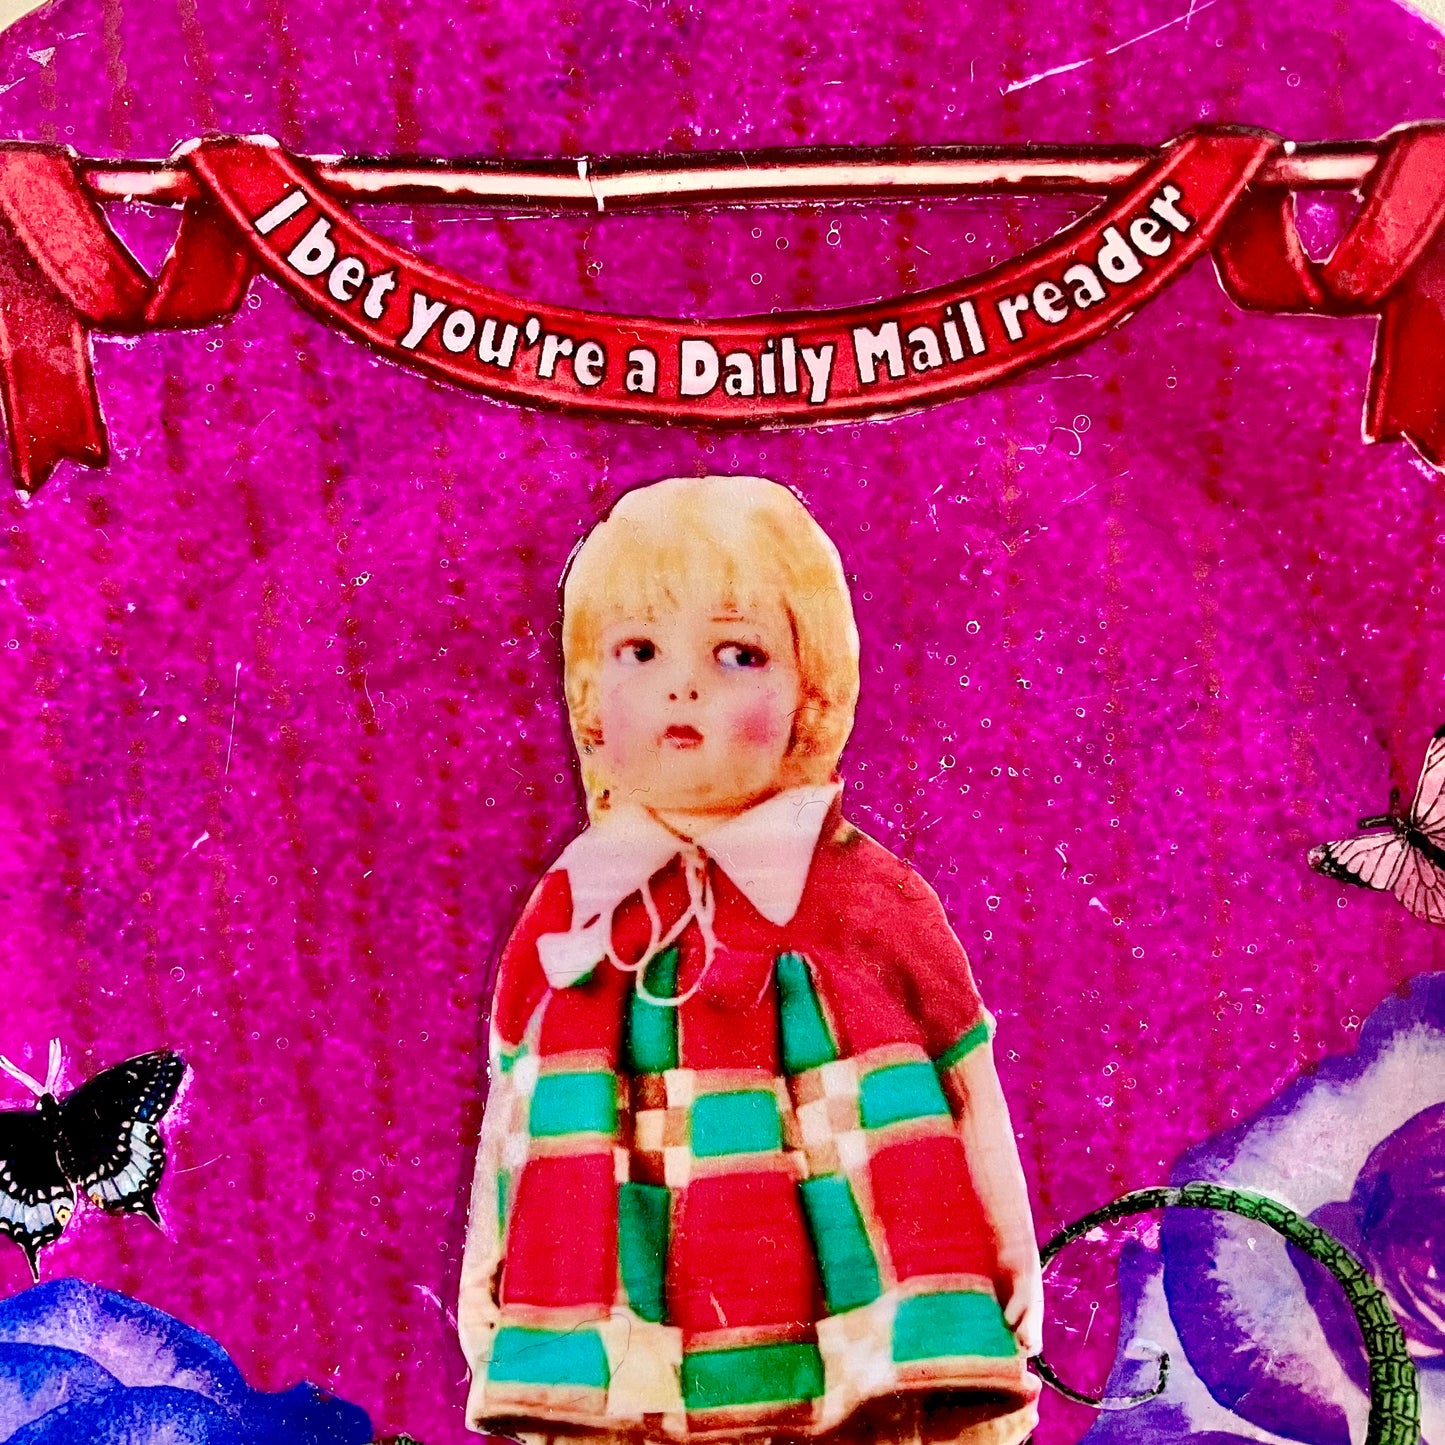 "I Bet You're A Daily Mail Reader" Wall Plate by House of Frisson, closeup detail of the collage showing a vintage doll, on a purple background.